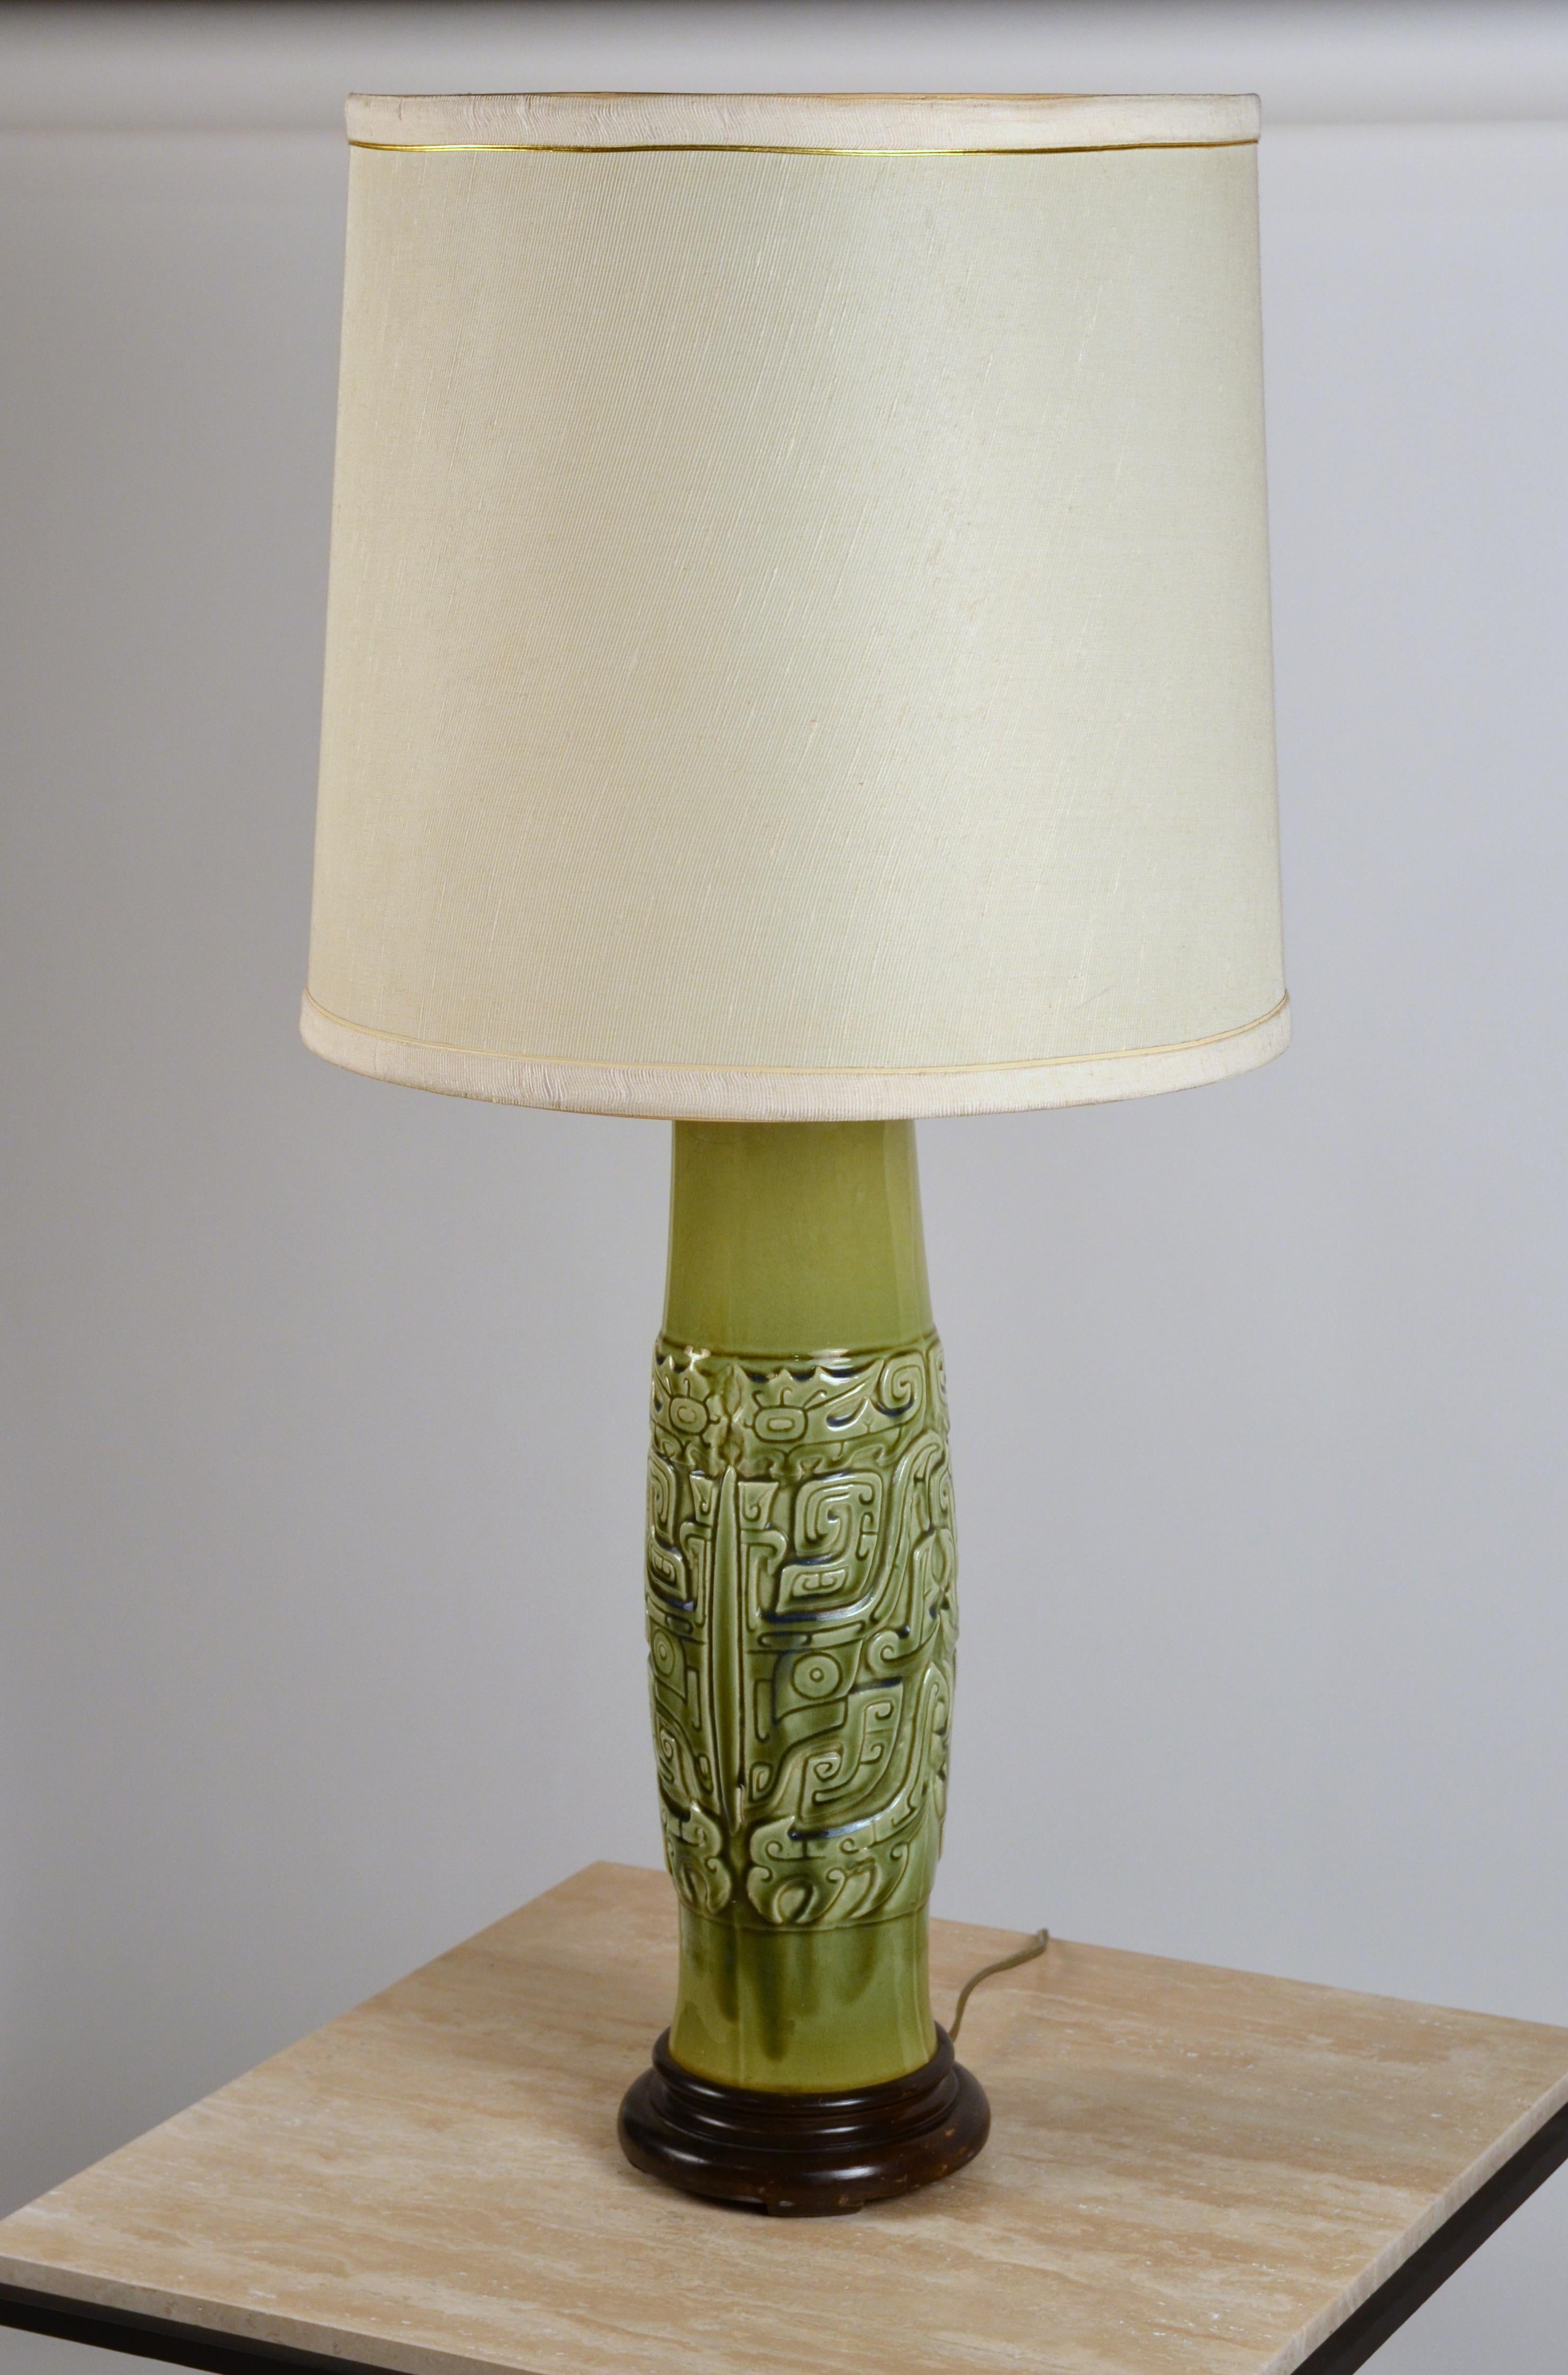 Elegant Mayan inspired ceramic lamp with original shade.

Overall lamp dimensions (listed): 33 in. tall x 16 in. diameter.

The body (to the final) is 33 in. tall x 6 in. diameter.

The shade is 14 in. diameter at top x 16 in. diameter at